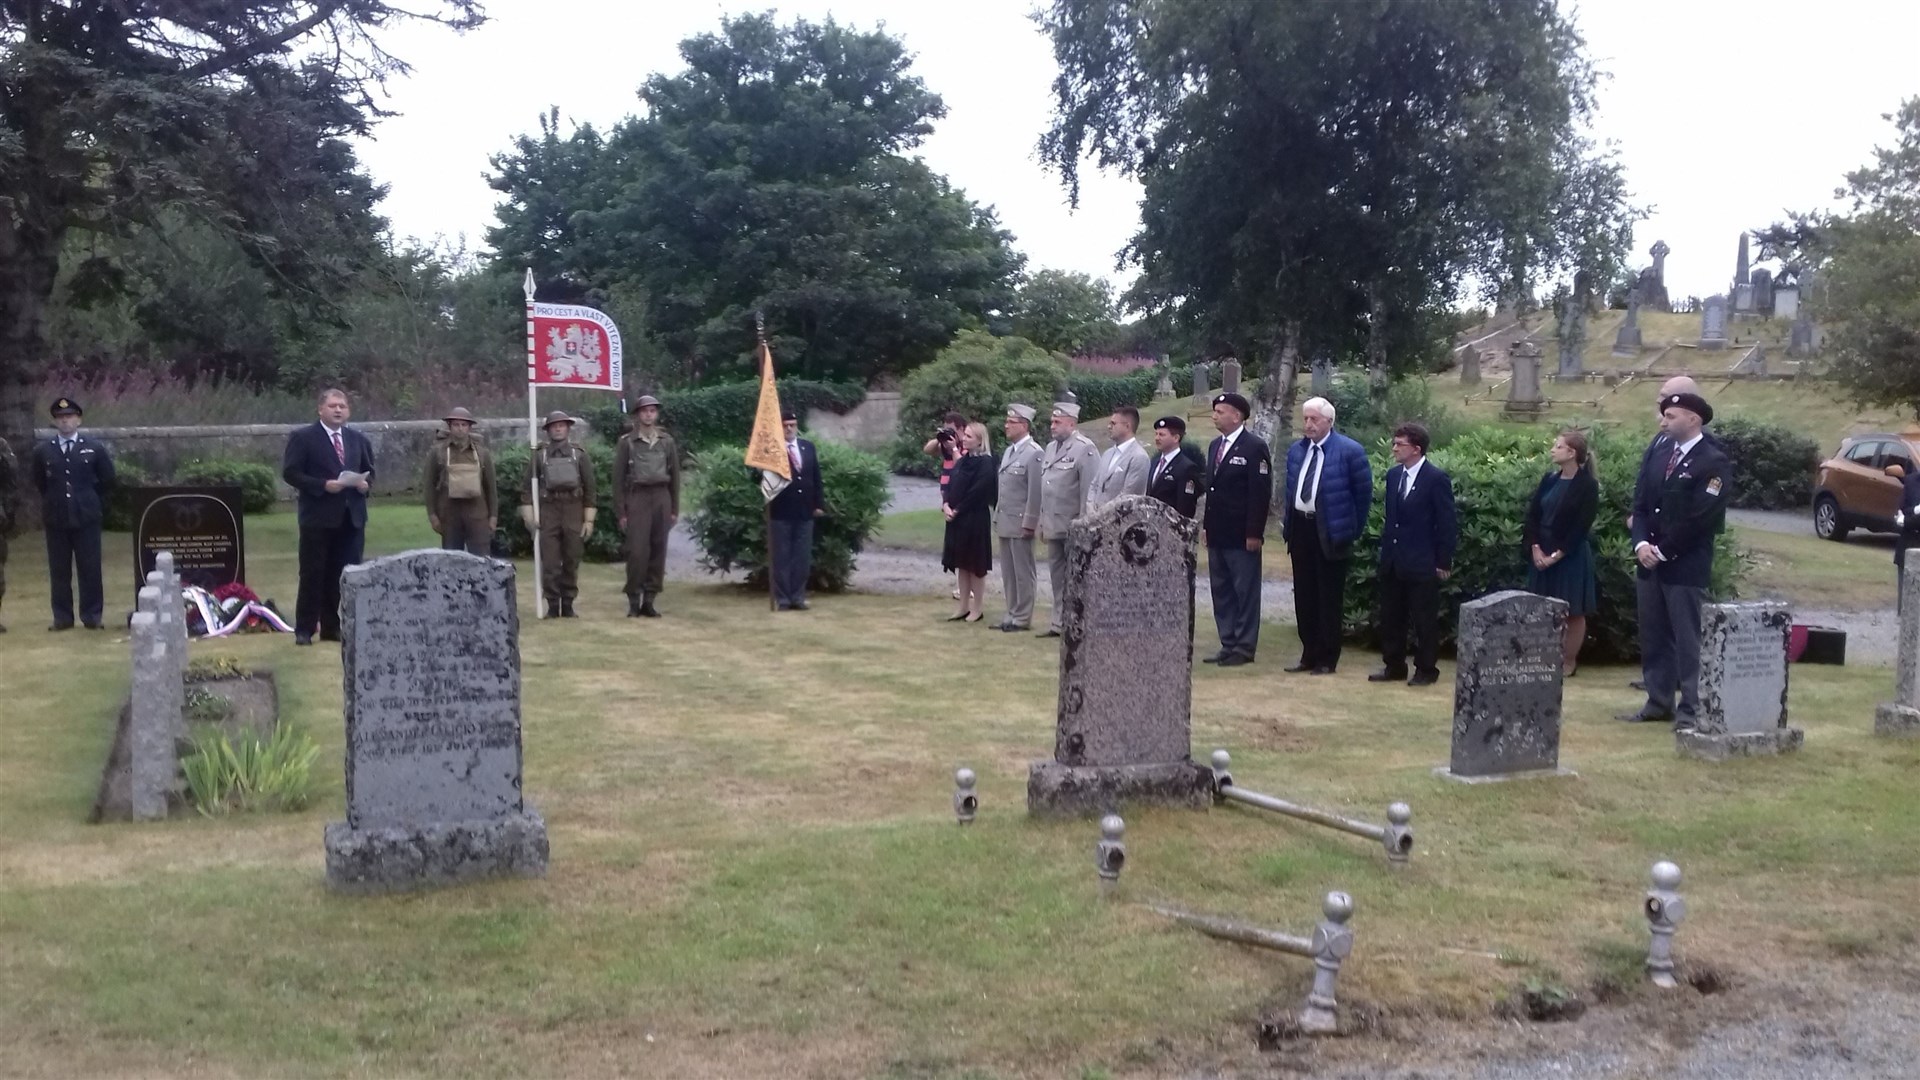 The Czech delegation took part in a poignant ceremony.